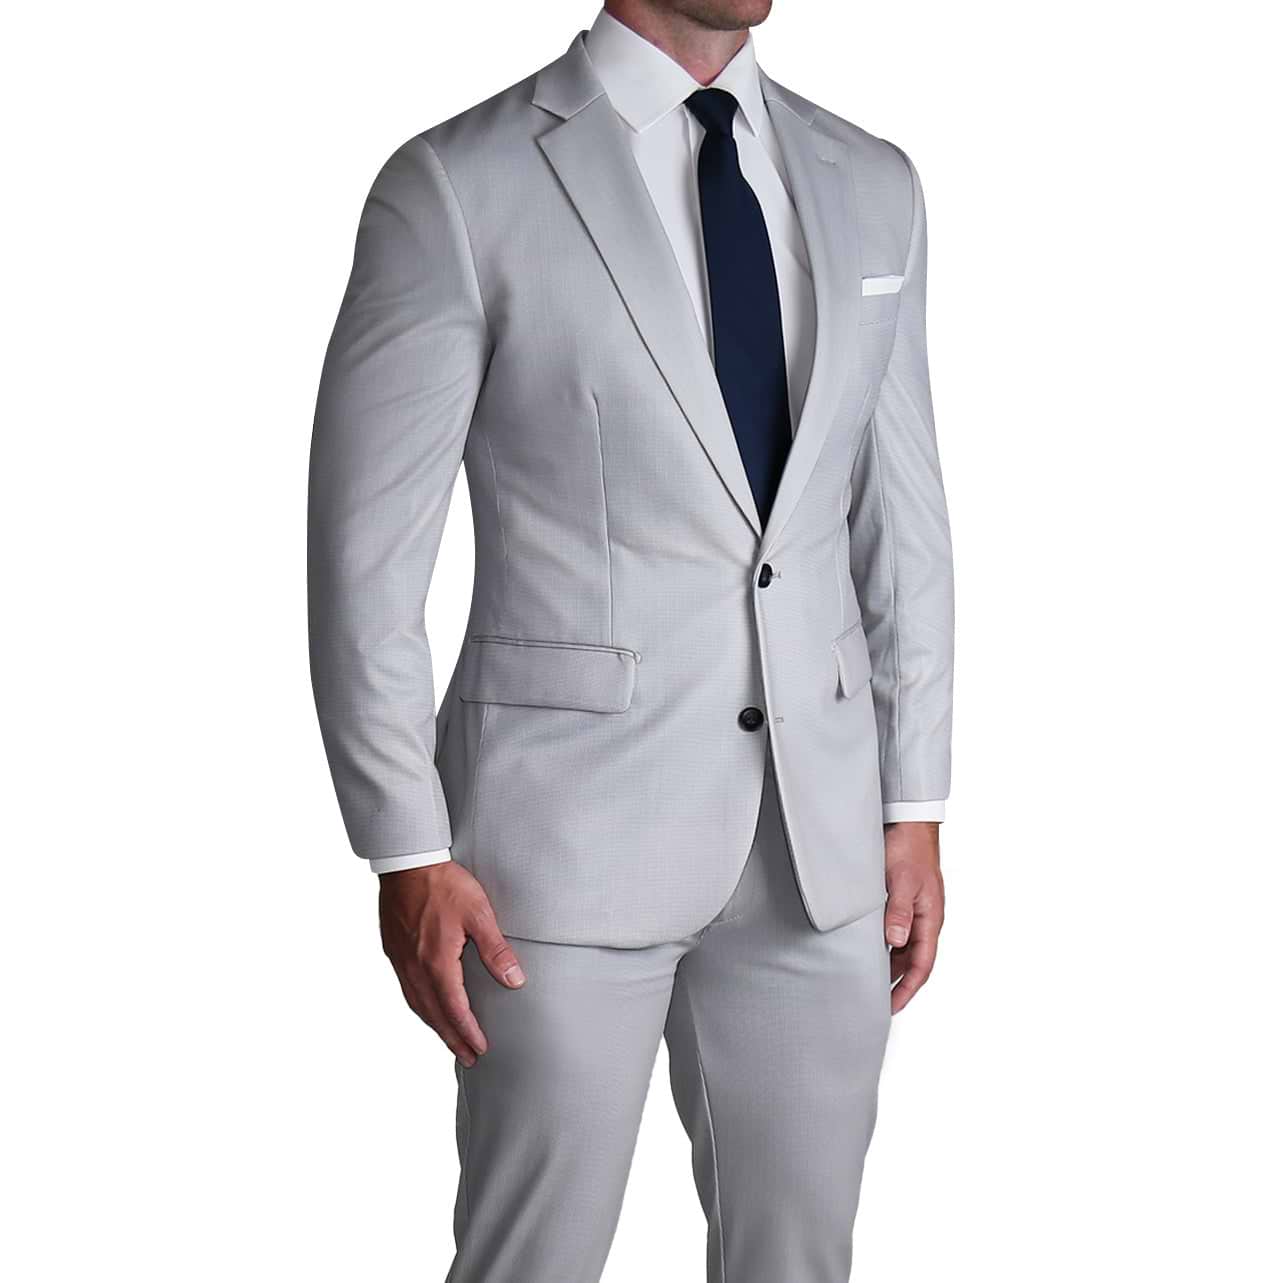 Navy blue jacket with light grey trousers